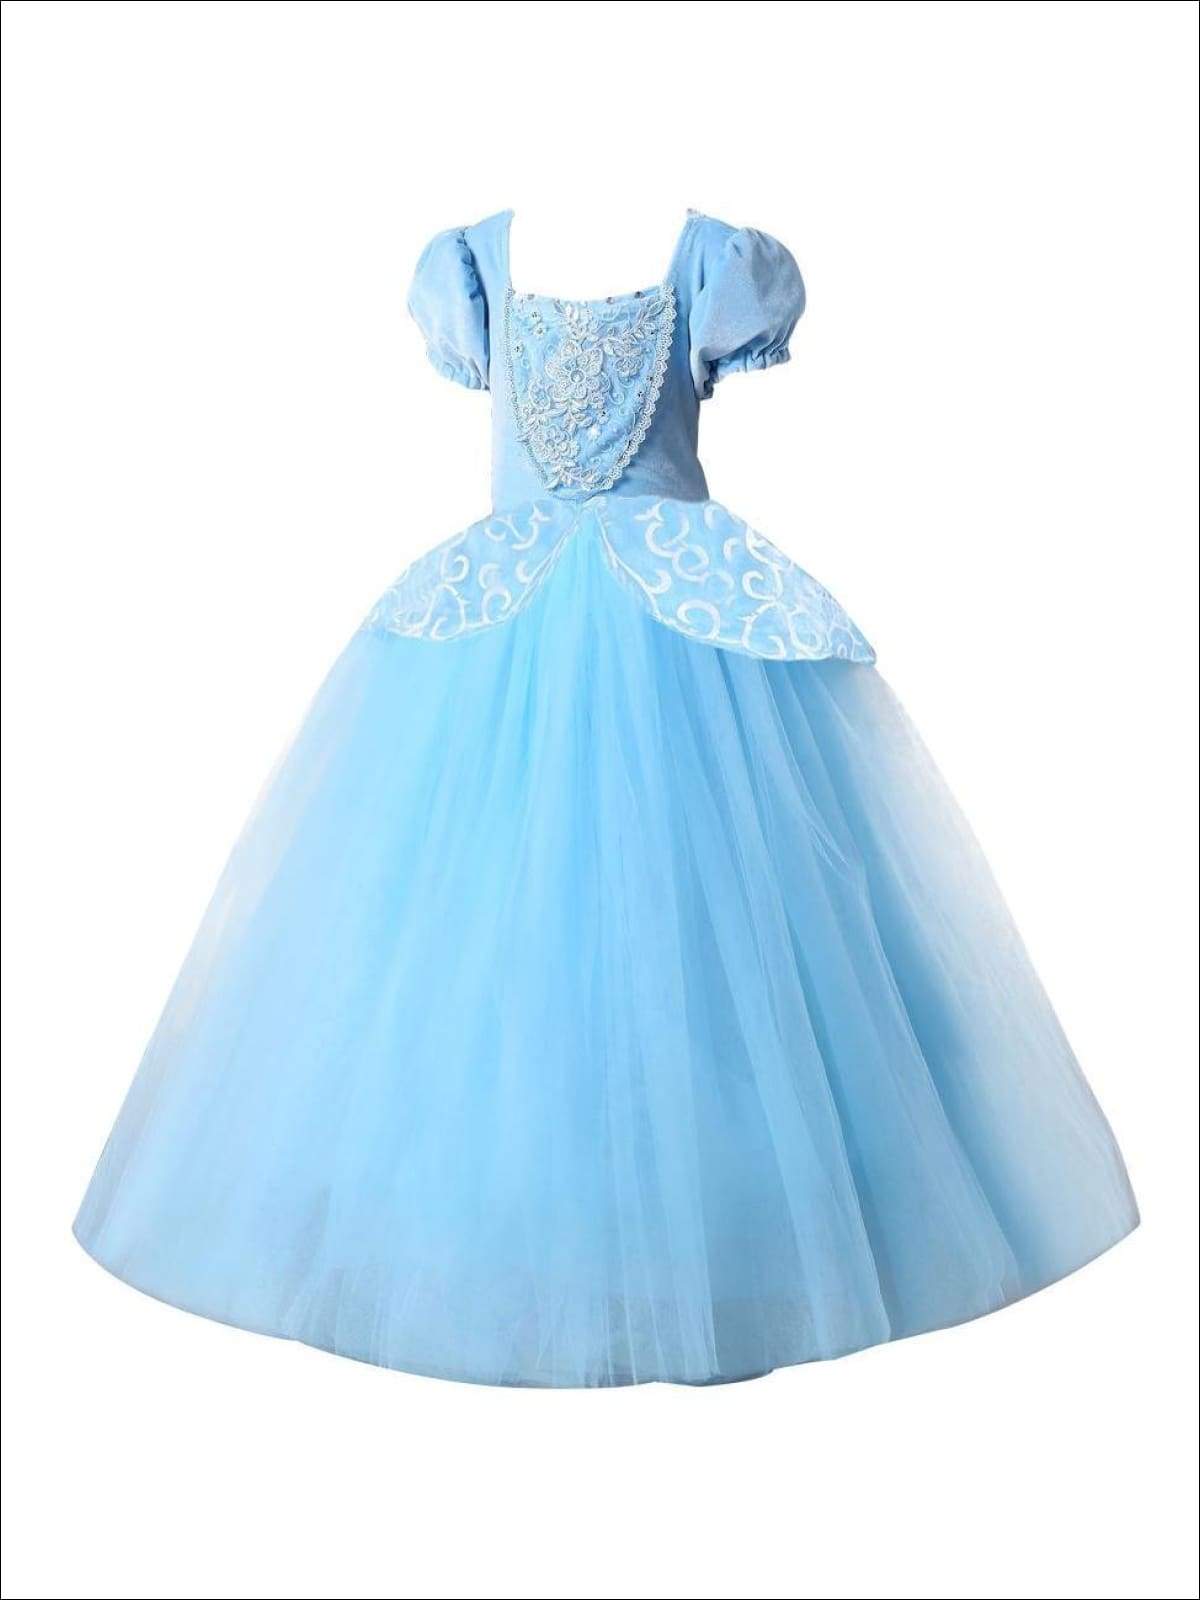 Buy Princess Cinderella Girls Costume Party Fancy Halloween Cosplay Dress  Up with Accessories Blue Online at Low Prices in India - Amazon.in